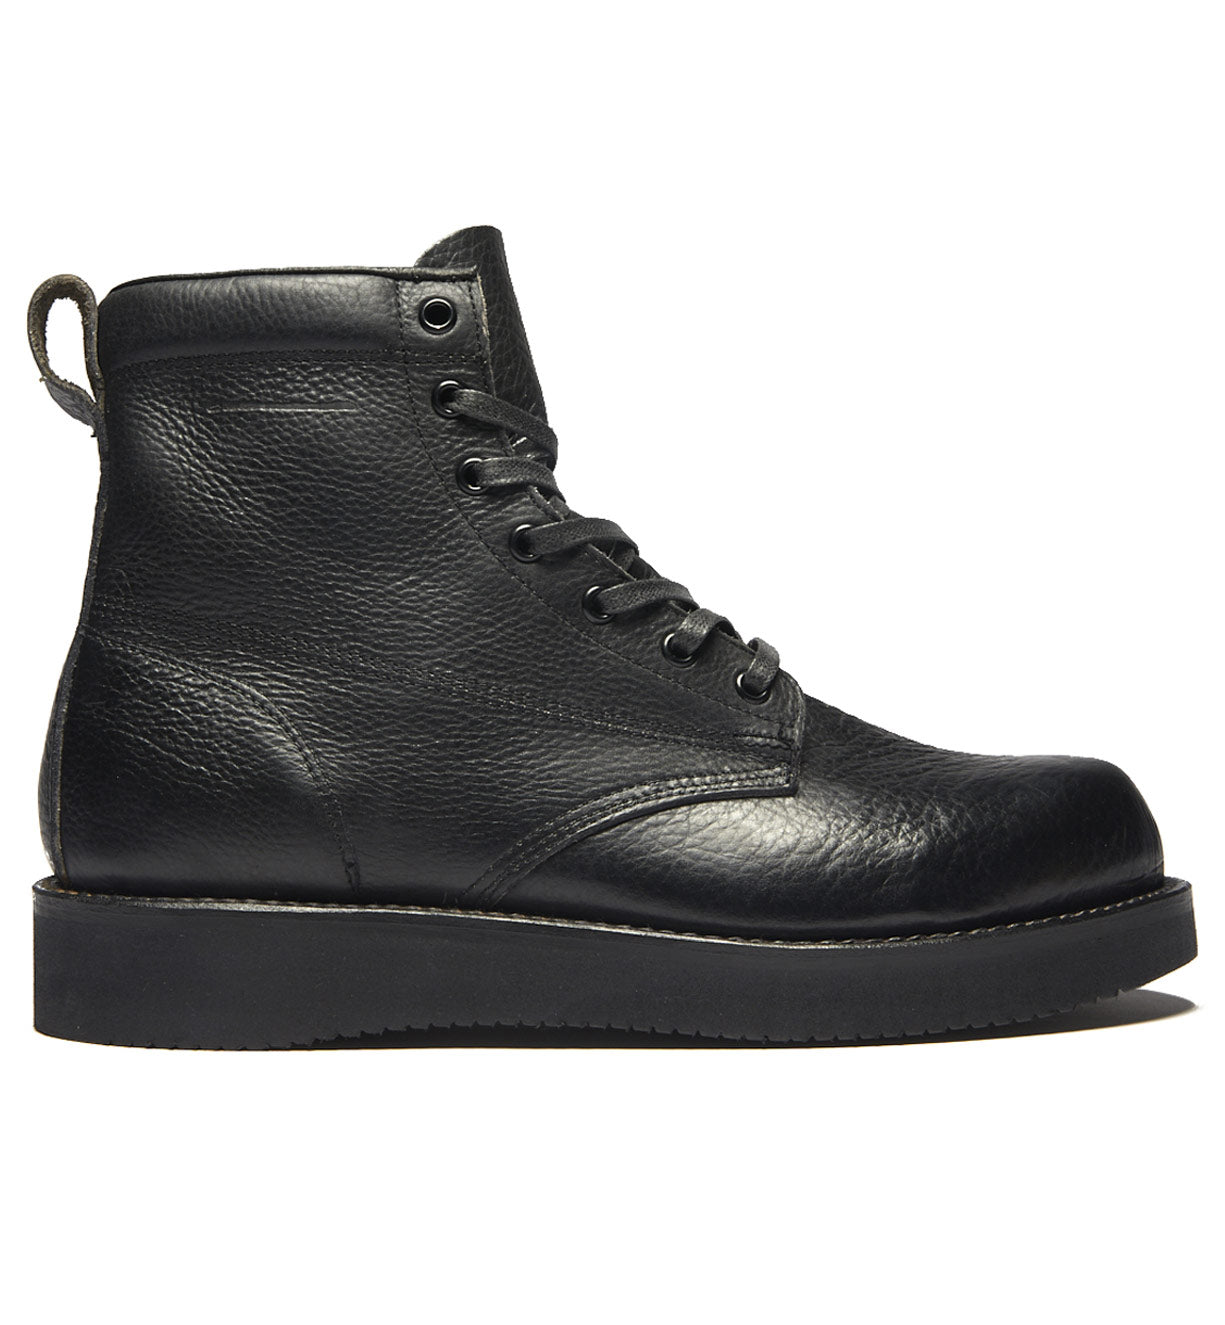 A signature James Boot from the Broken Homme collection with a rubber sole.